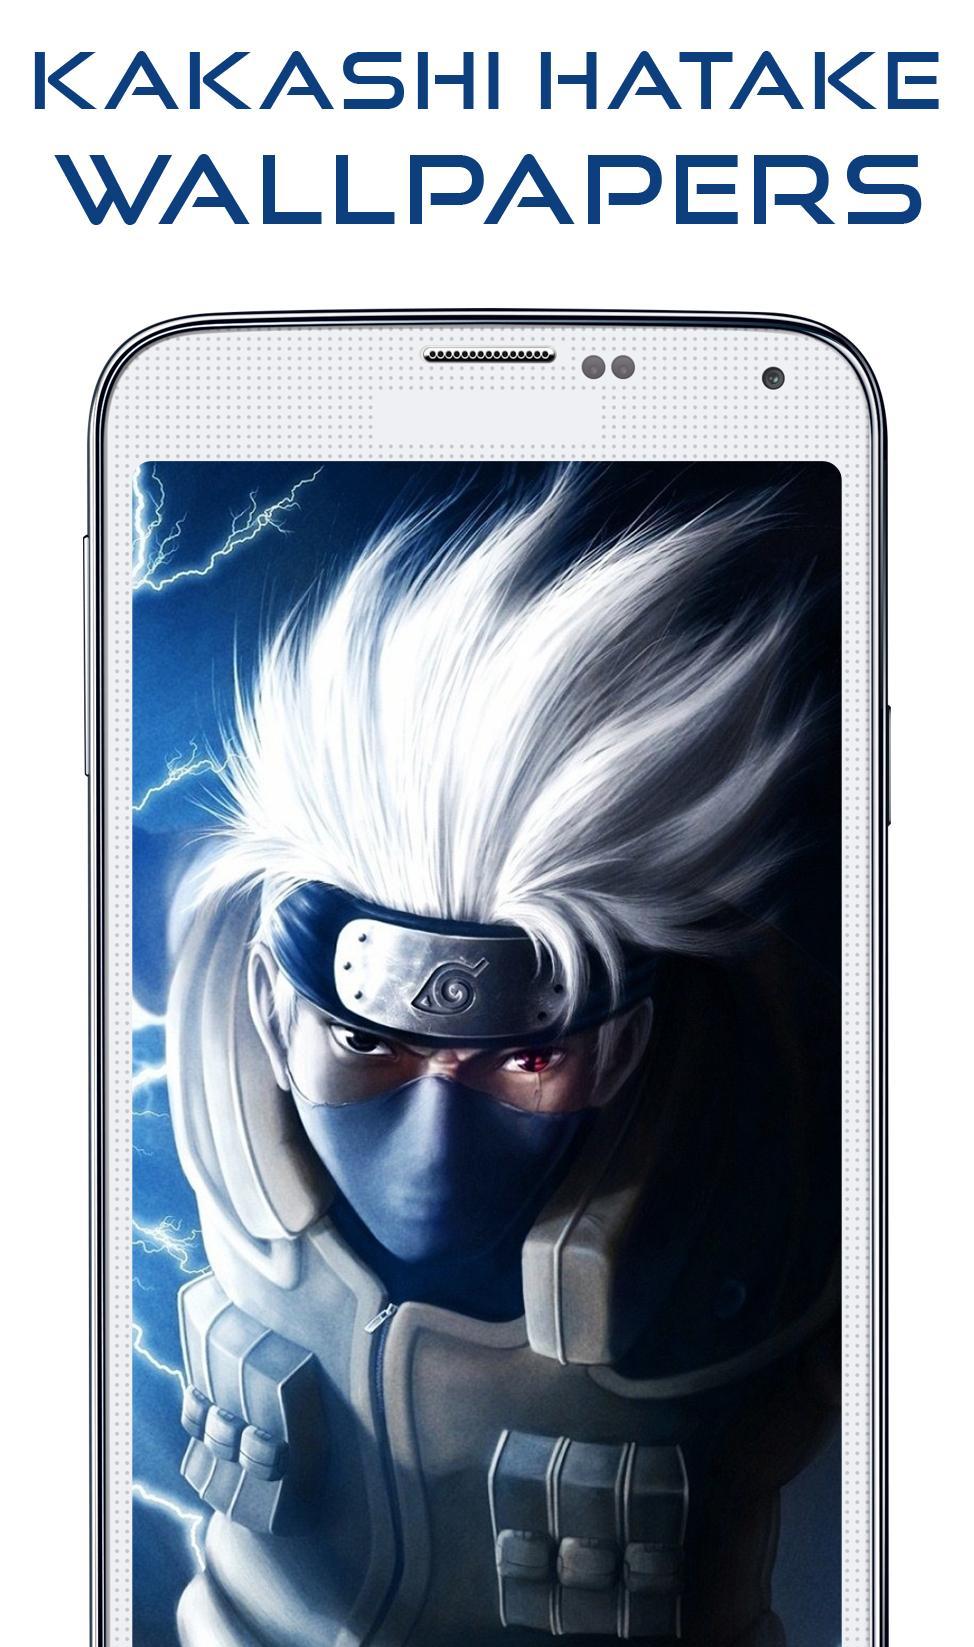 Hd Kakashi Hatake Wallpapers For Android Apk Download - how to get free robux easy robux today 2018 kakashi